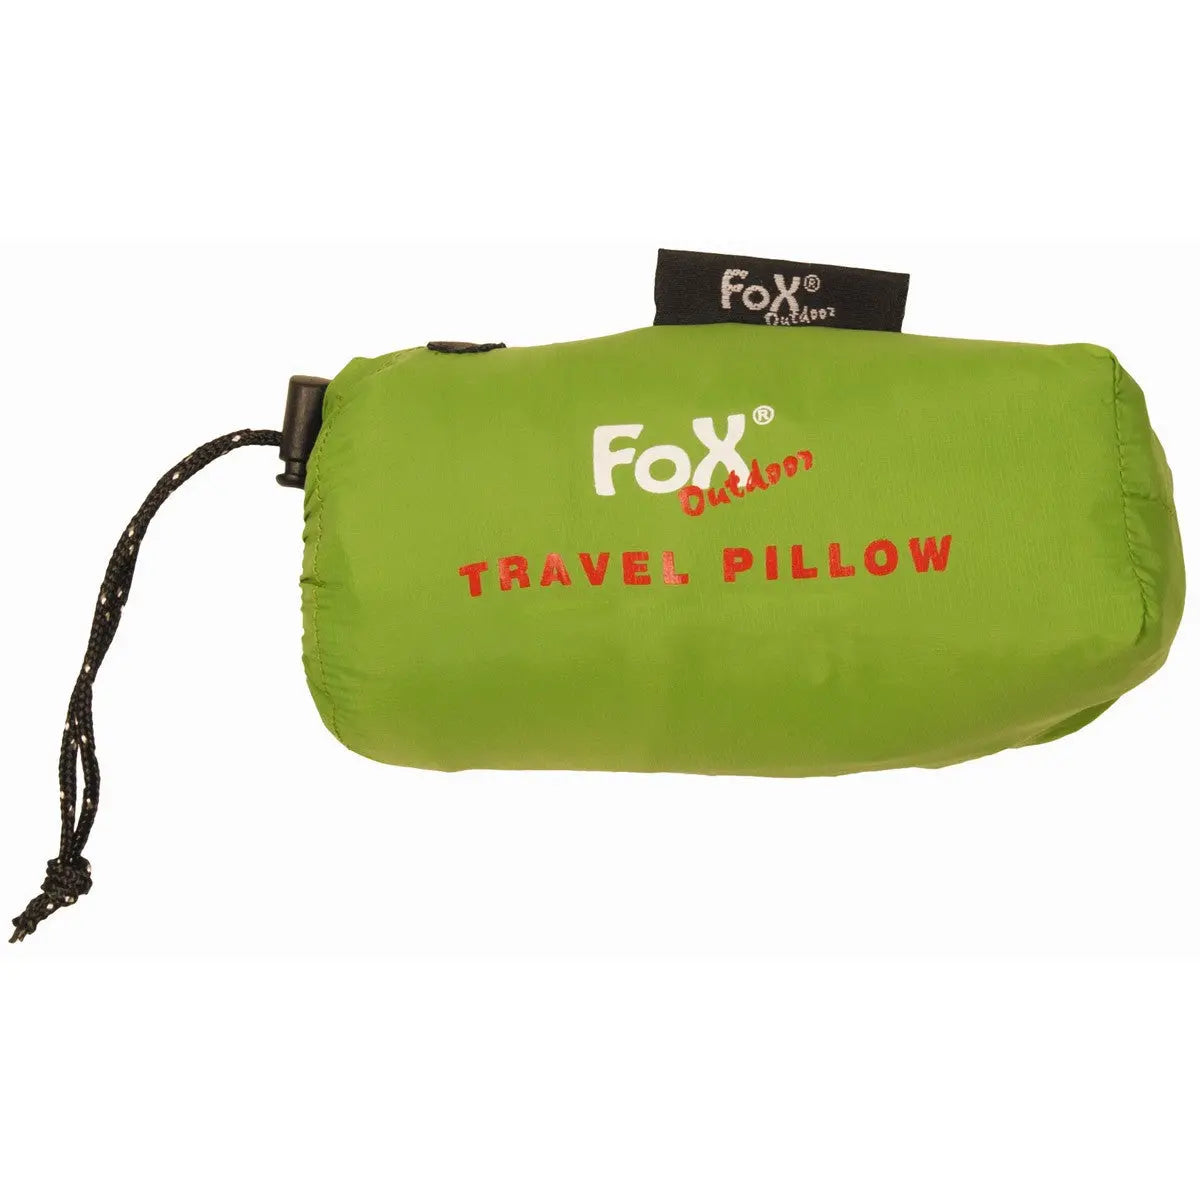 Travel Pillow, inflatable, OD green NSO Gear